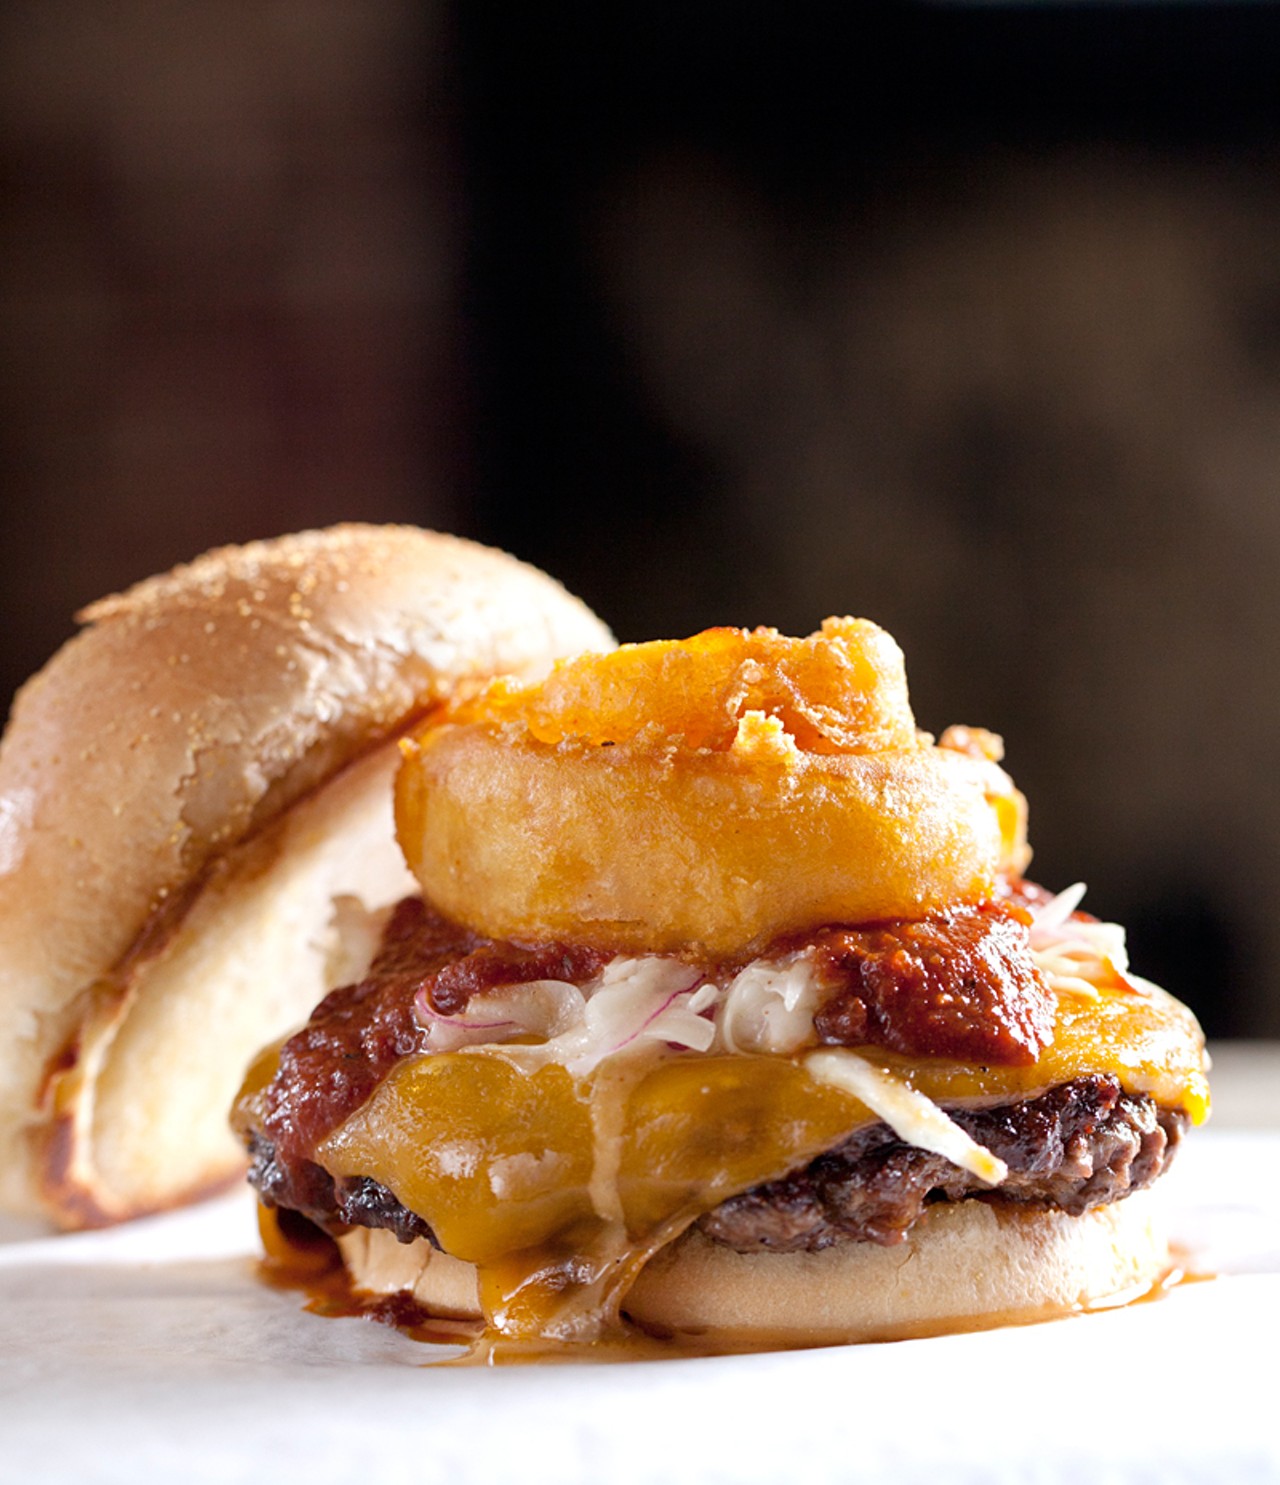 The "Smokehouse Smash Burger" is served with bbq, bacon jam, onion ring, carolina slaw and cheddar cheese.